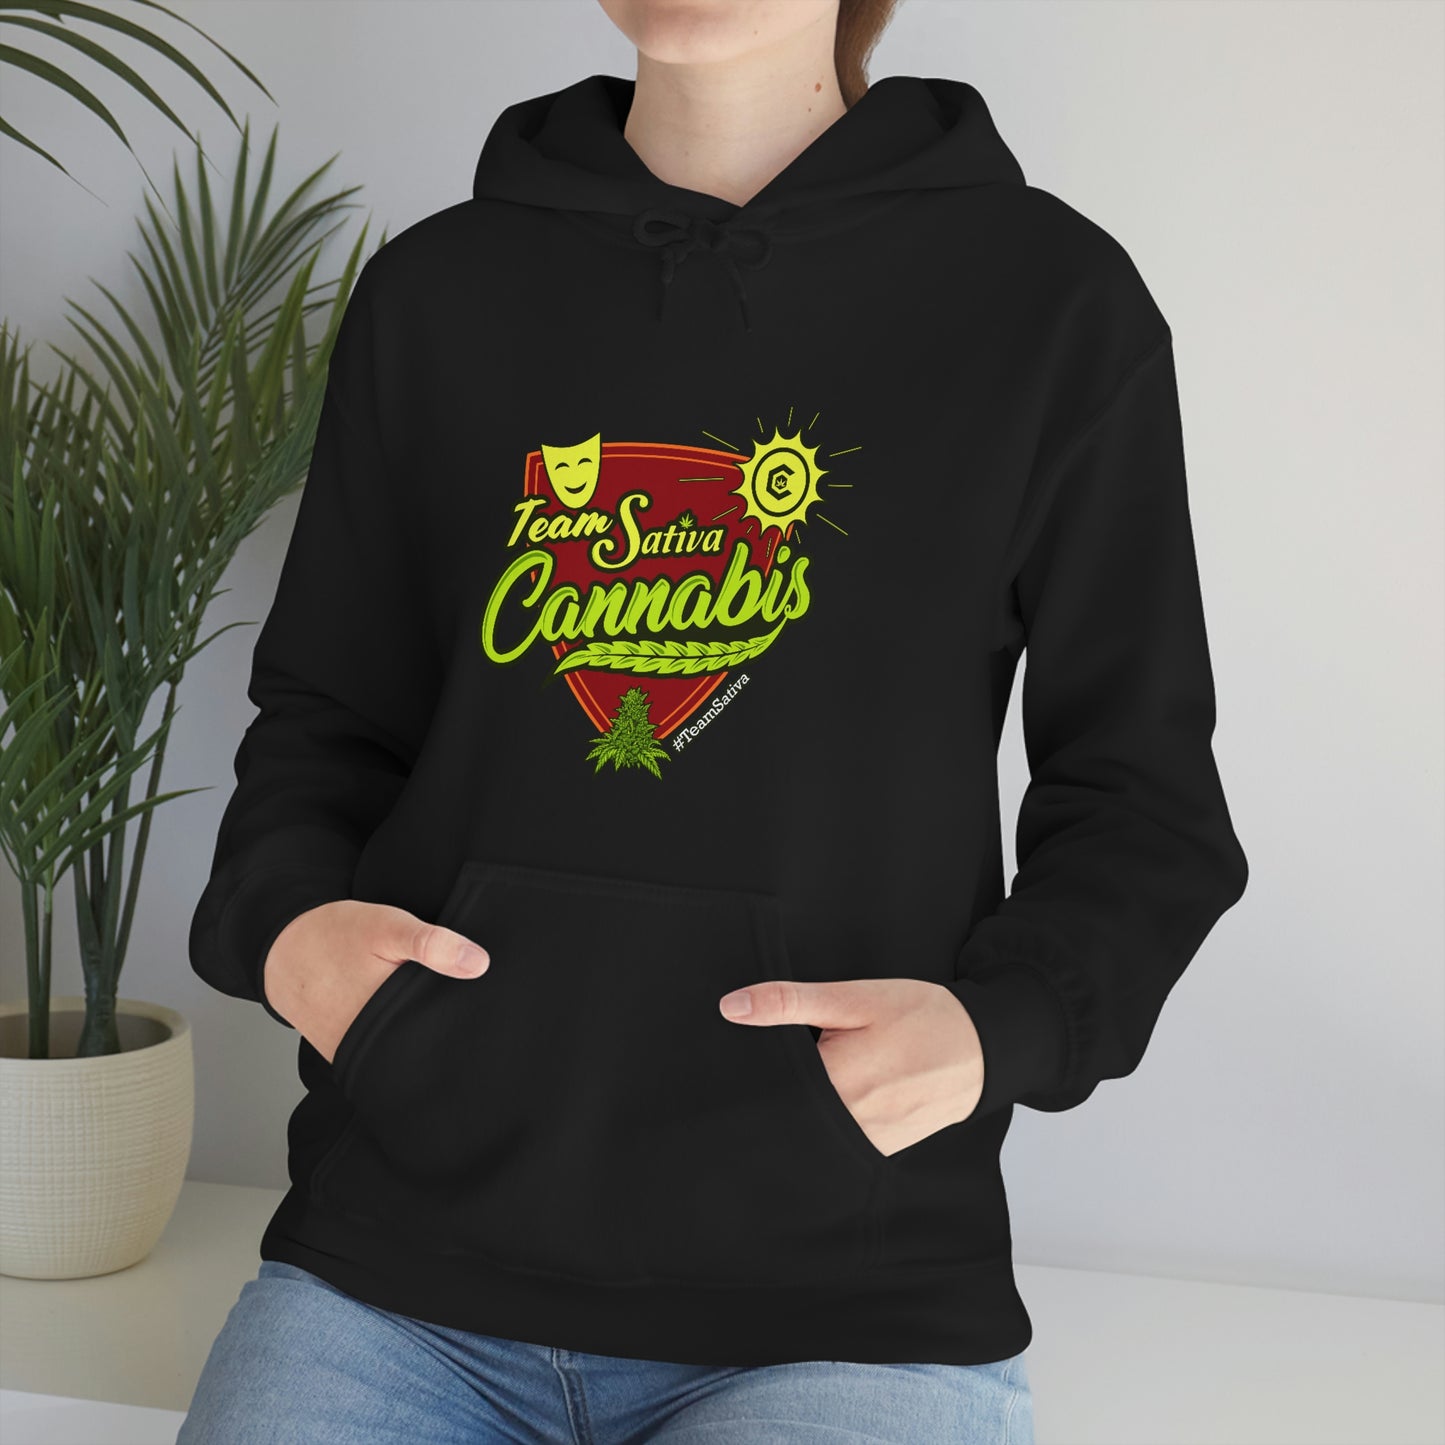 a woman wearing a black hoodie with the words "Team Sativa Stoner Sweatshirt" on it.